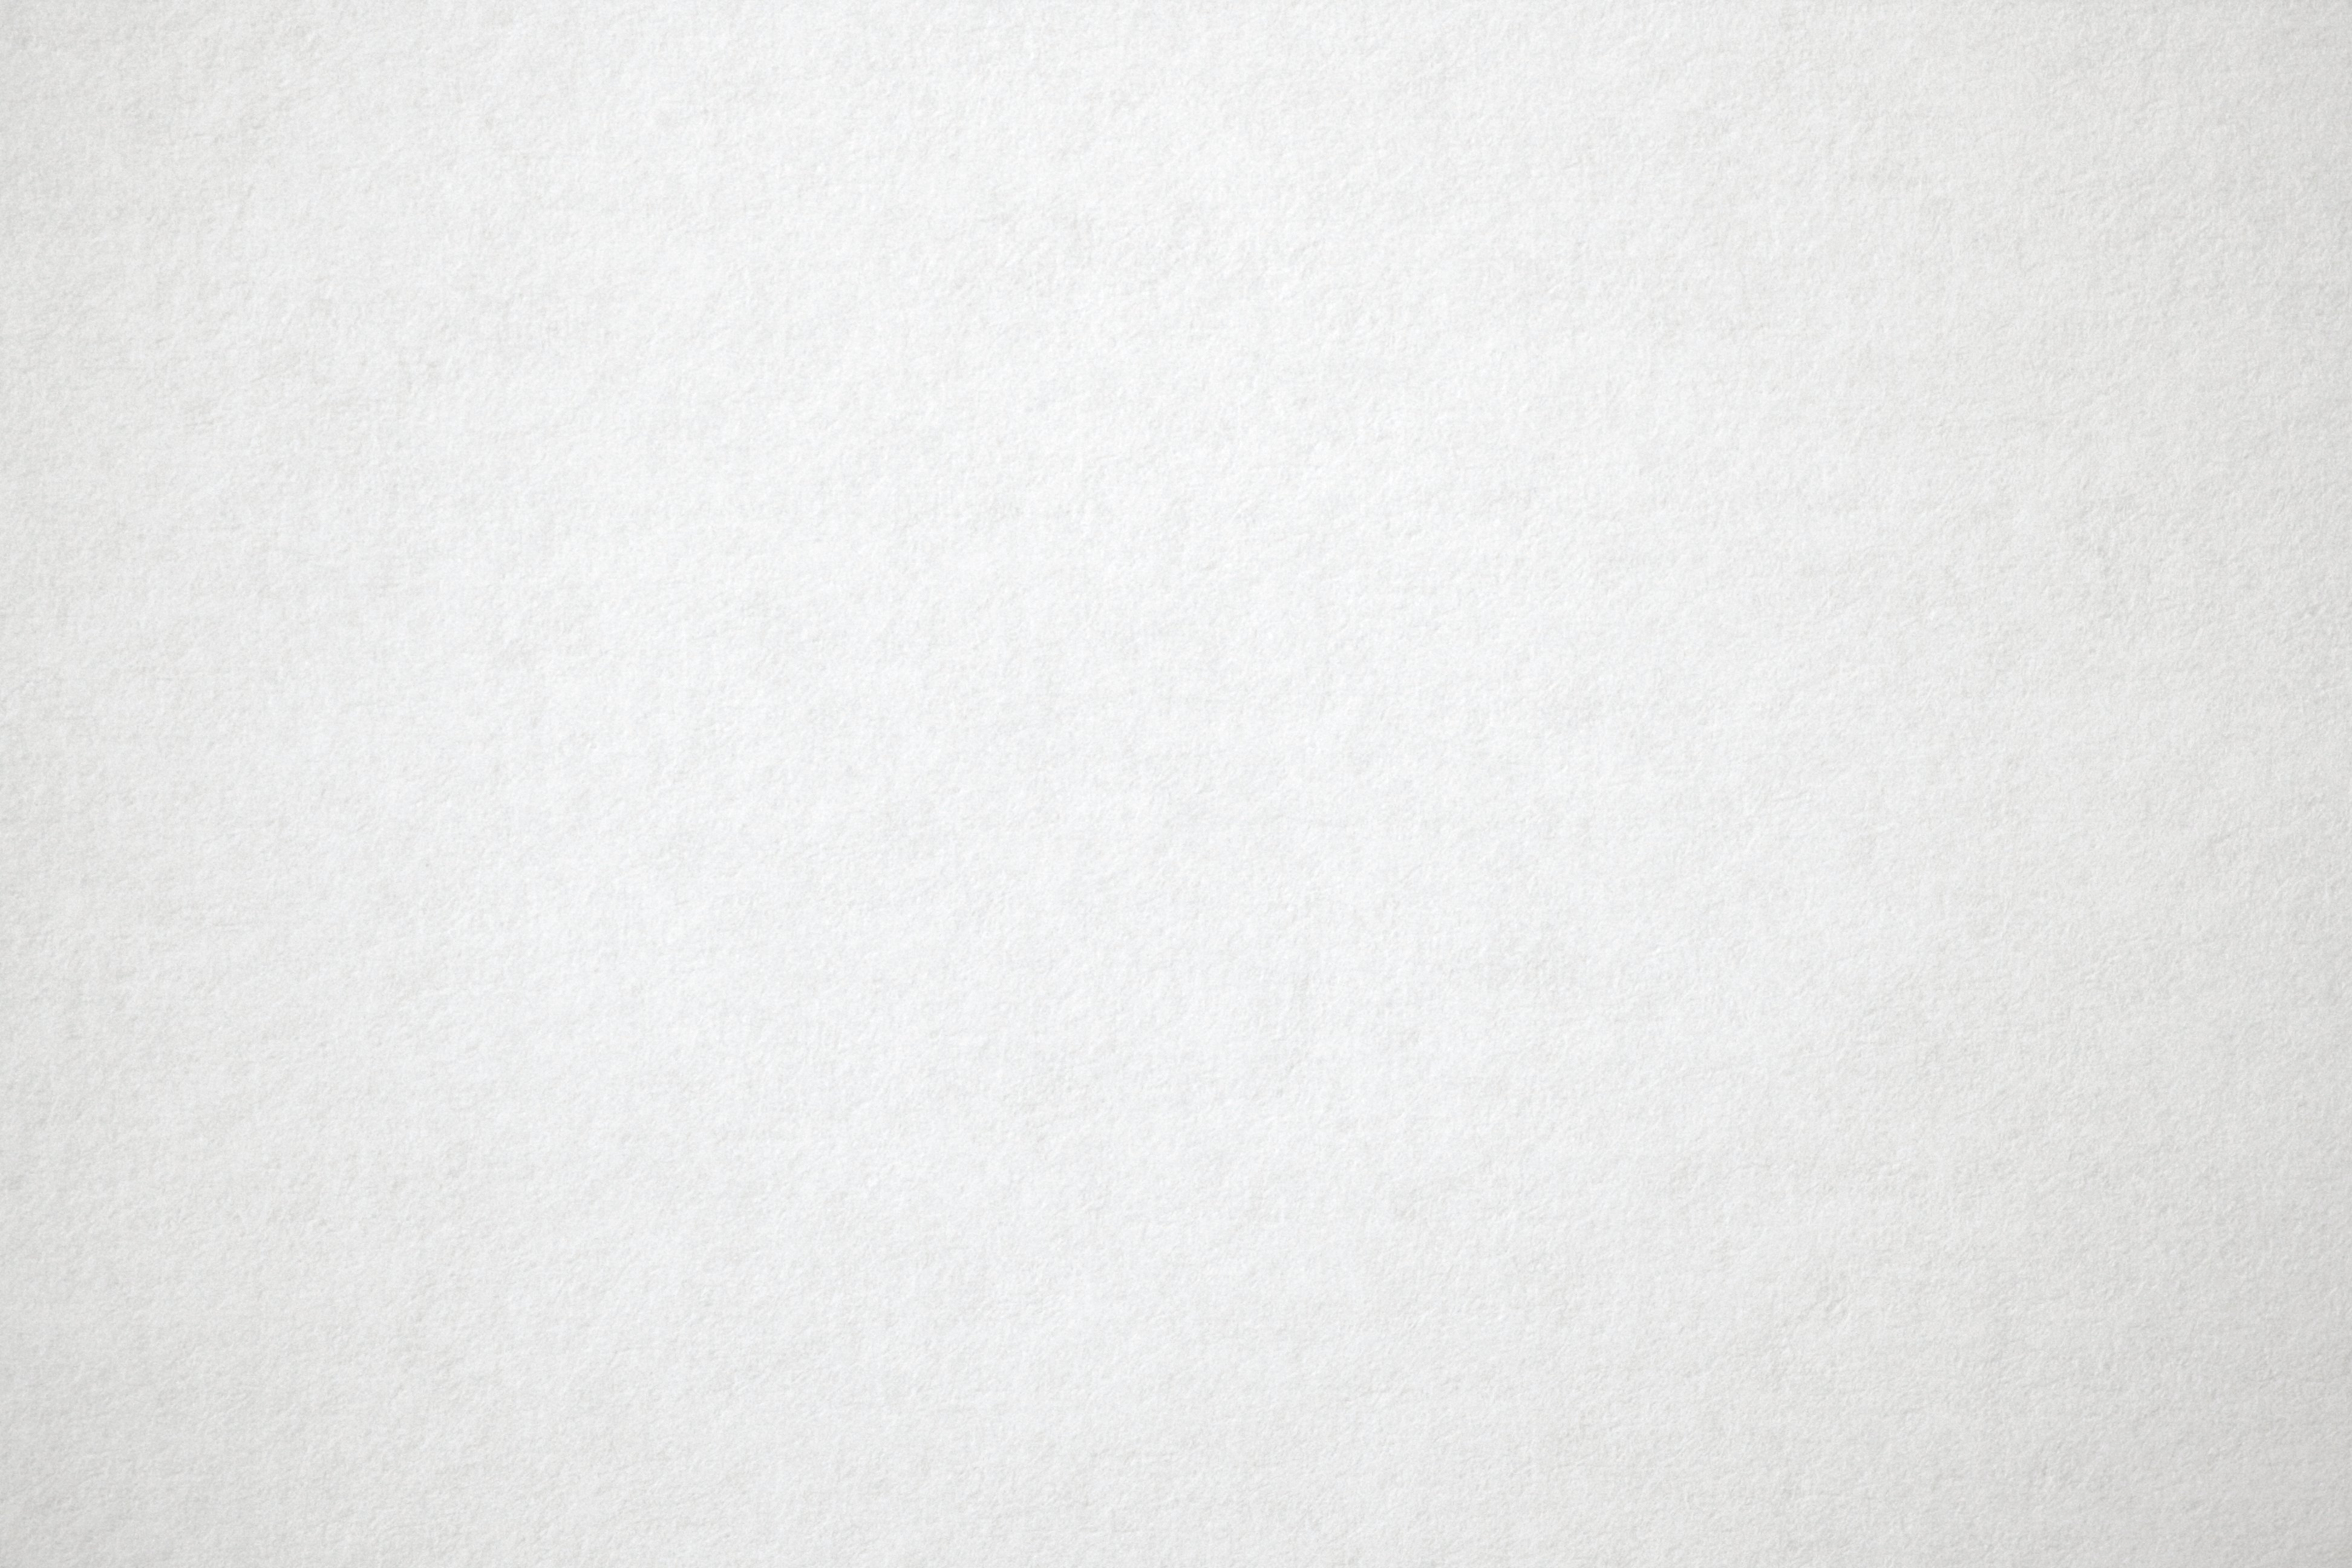 Background white paper texture - Wisc-Online OER